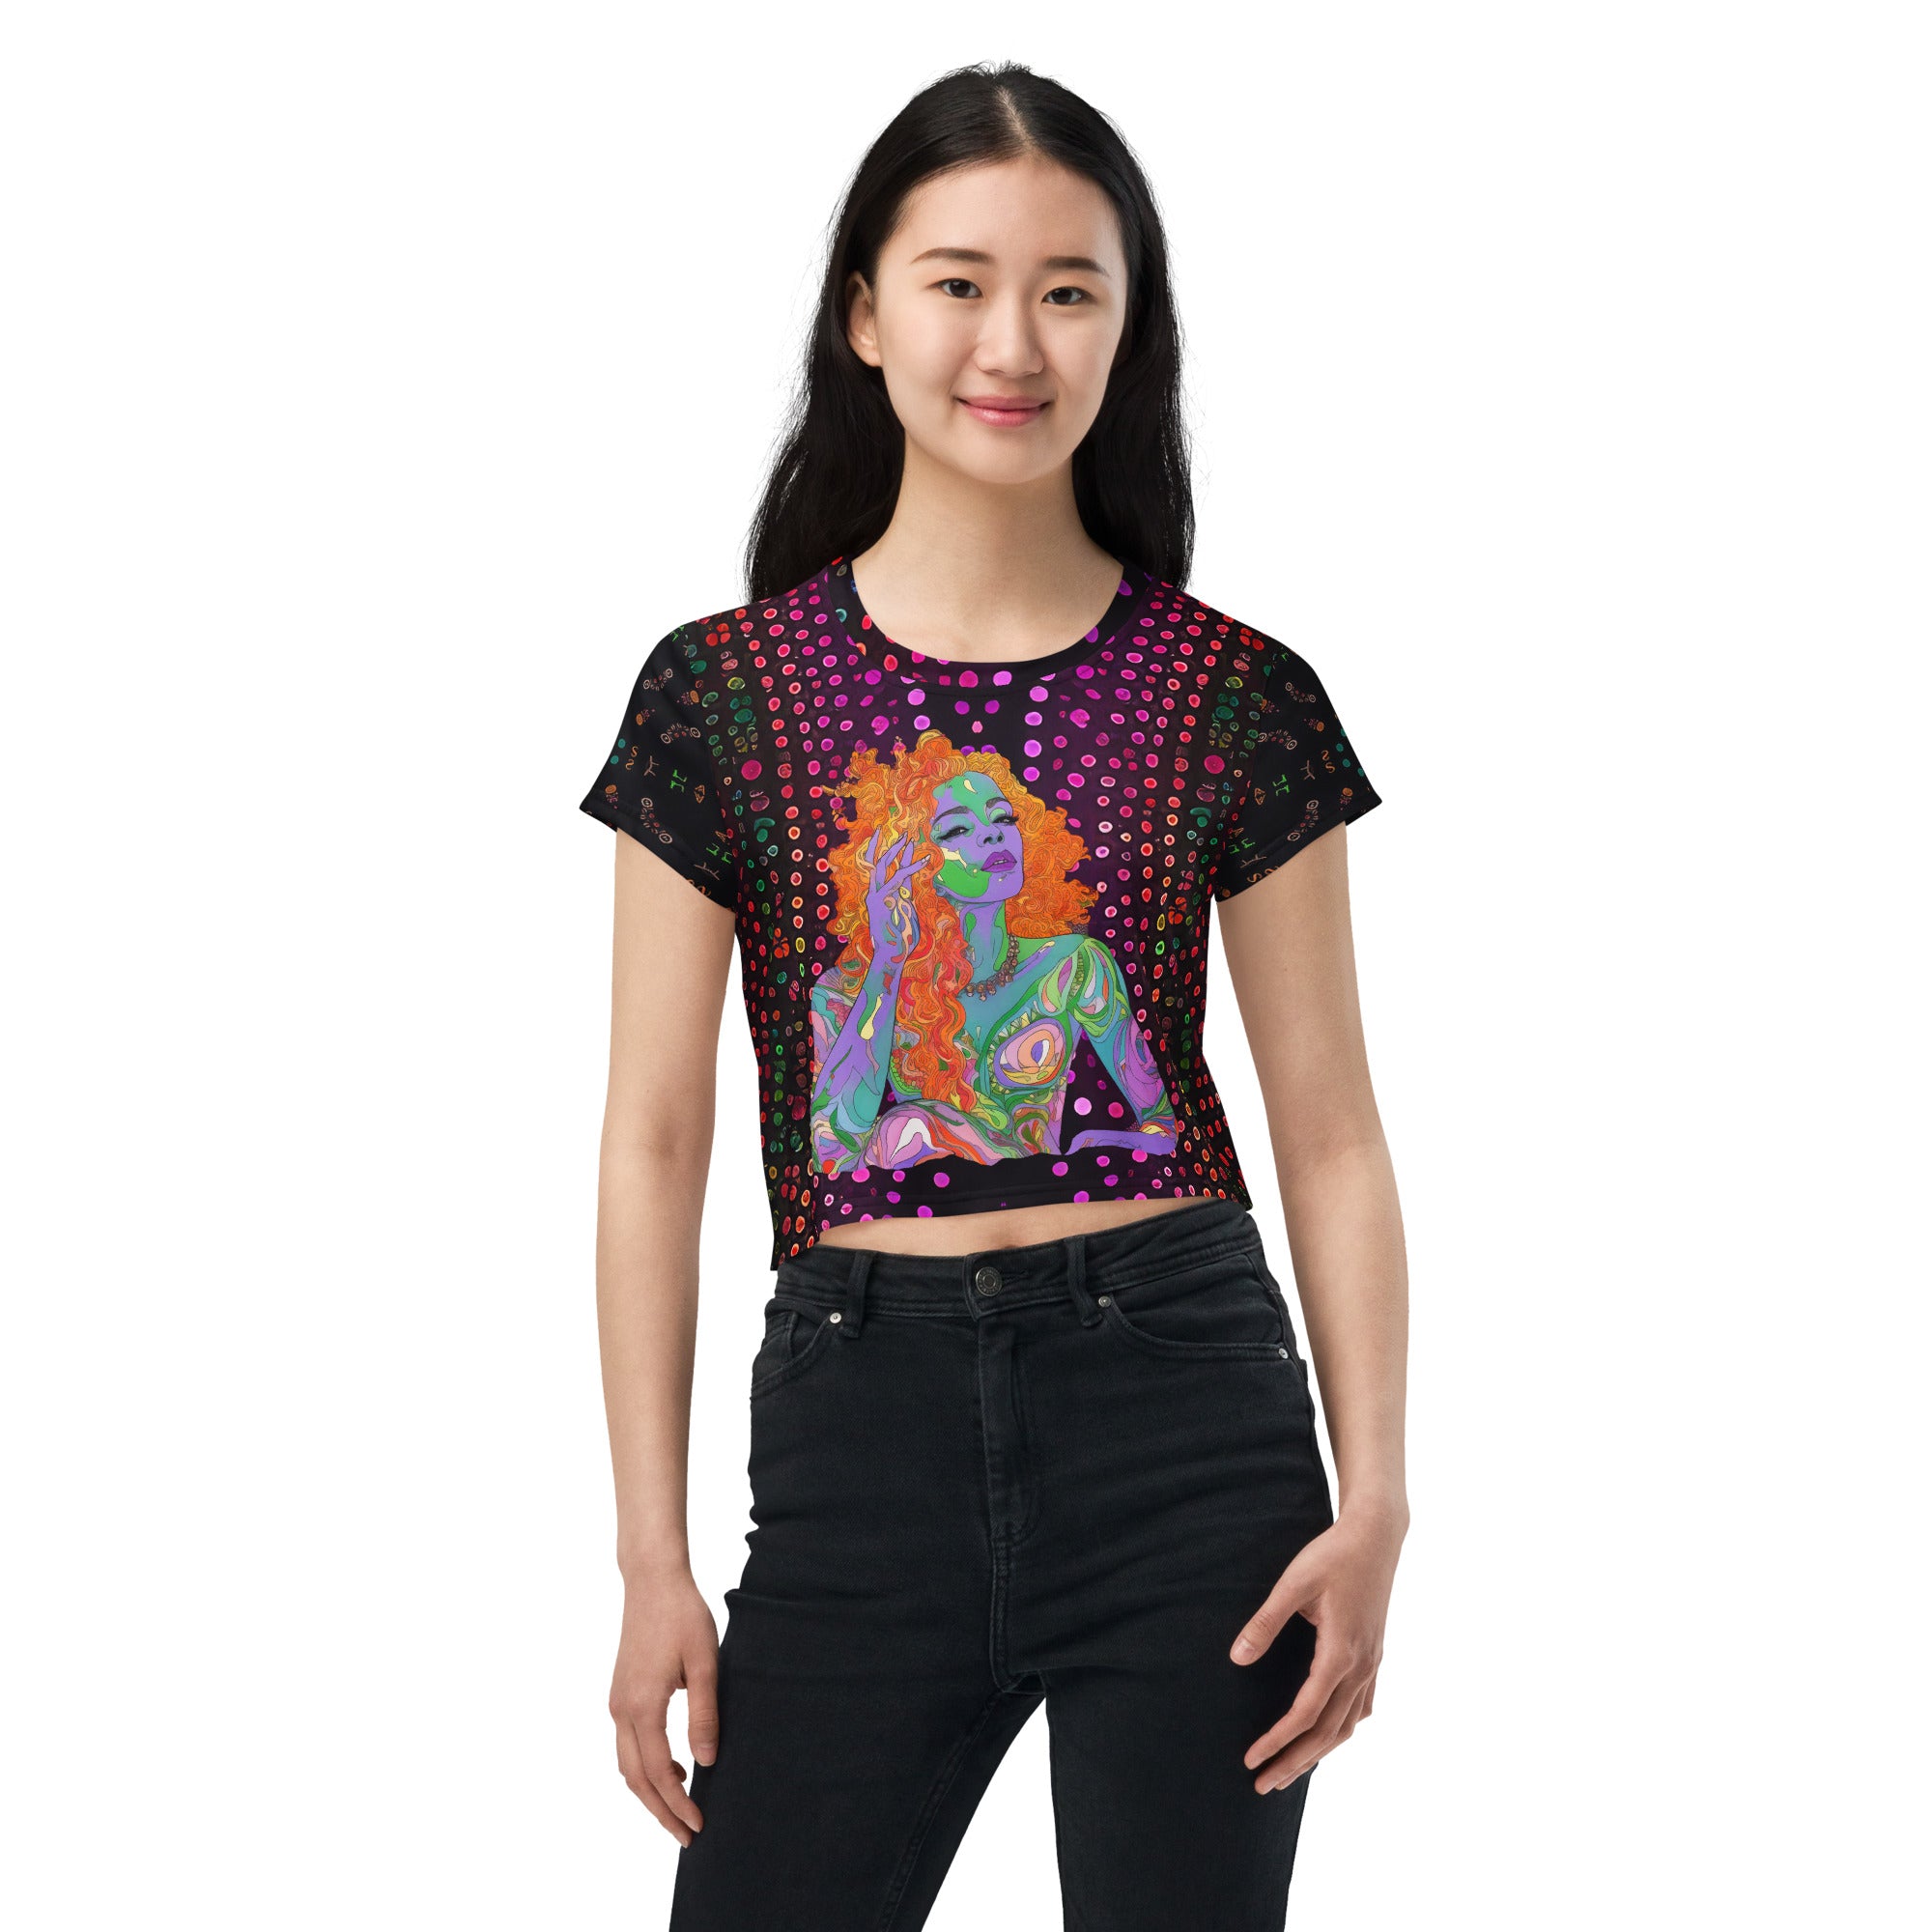 Floral Fantasy Women's Crop T-Shirt on a clothing mannequin.